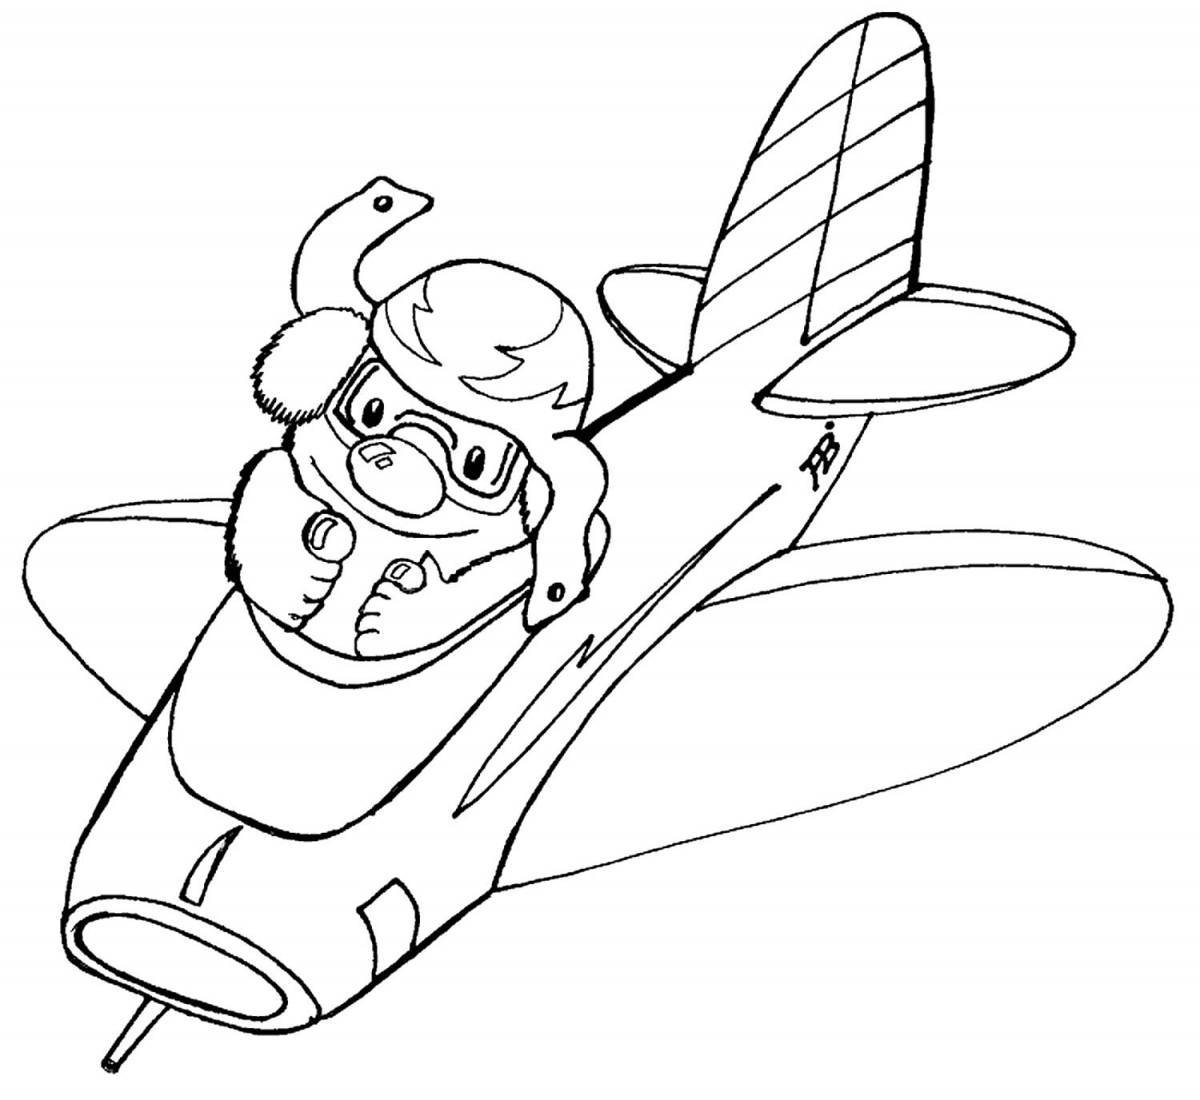 Coloring pages of heroes